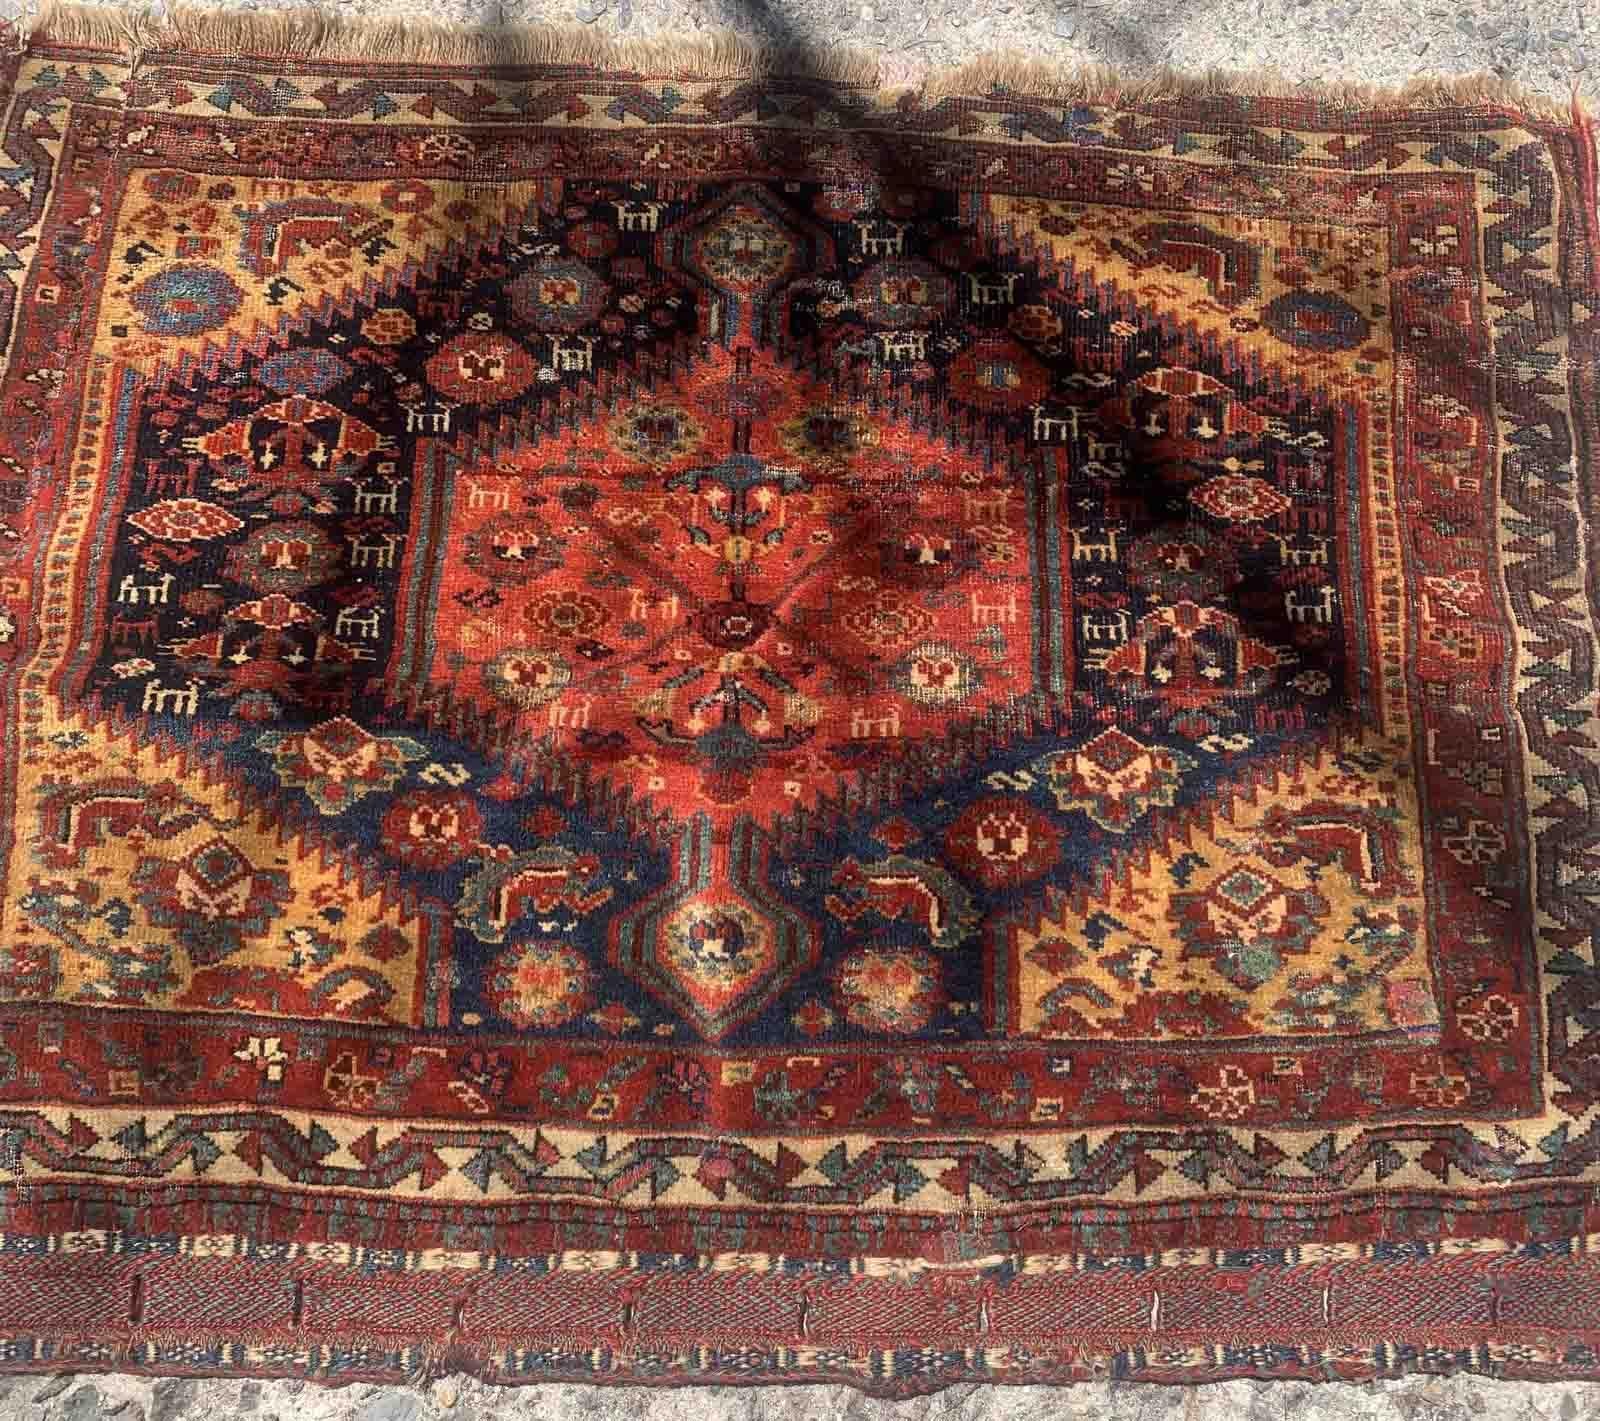 Handmade antique collectible Gashkai bagface. The rug is from the end of 19th century in original condition, it has some signs of age.

-condition: original, some signs of age,

-circa: 1880s,

-size: 2' x 2.6' (60cm x 79cm),

-material: